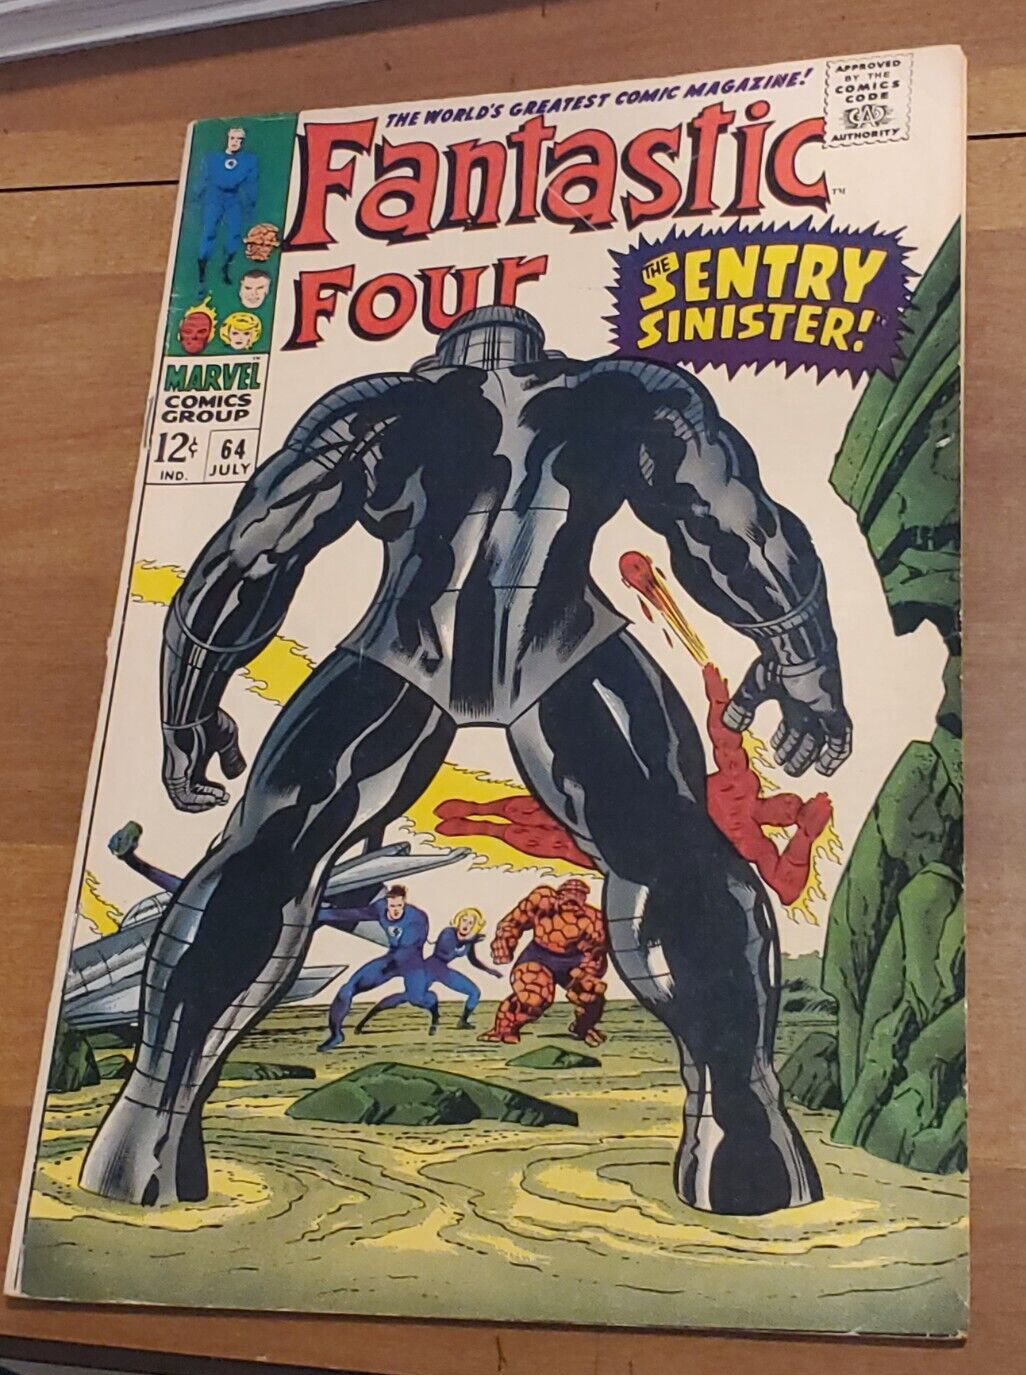 FANTASTIC FOUR #64 (1967) 1ST MENTION KREE 1ST APP KREE SENTRY NEED TO PAY RENT